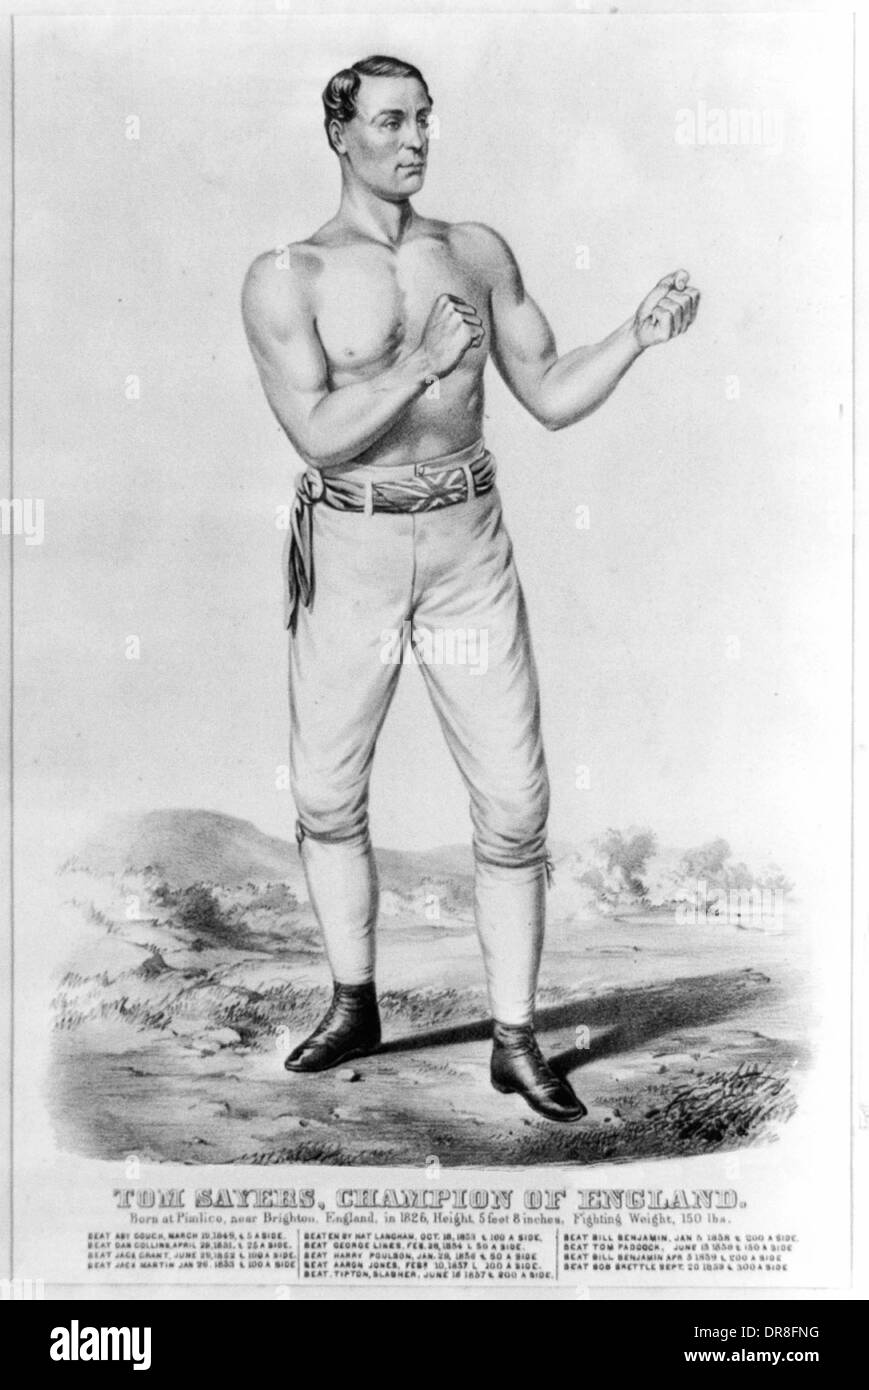 Tom Sayers, champion of England born at Pimlico near Brighton, Sussex 1826, height 5 ft. 8 inches, lowest feichting weight 10 st. 10 lbs. Tom Sayers, full-length portrait, facing right, in boxing stance. Includes list of fights with opponent's name and date of bout. Stock Photo